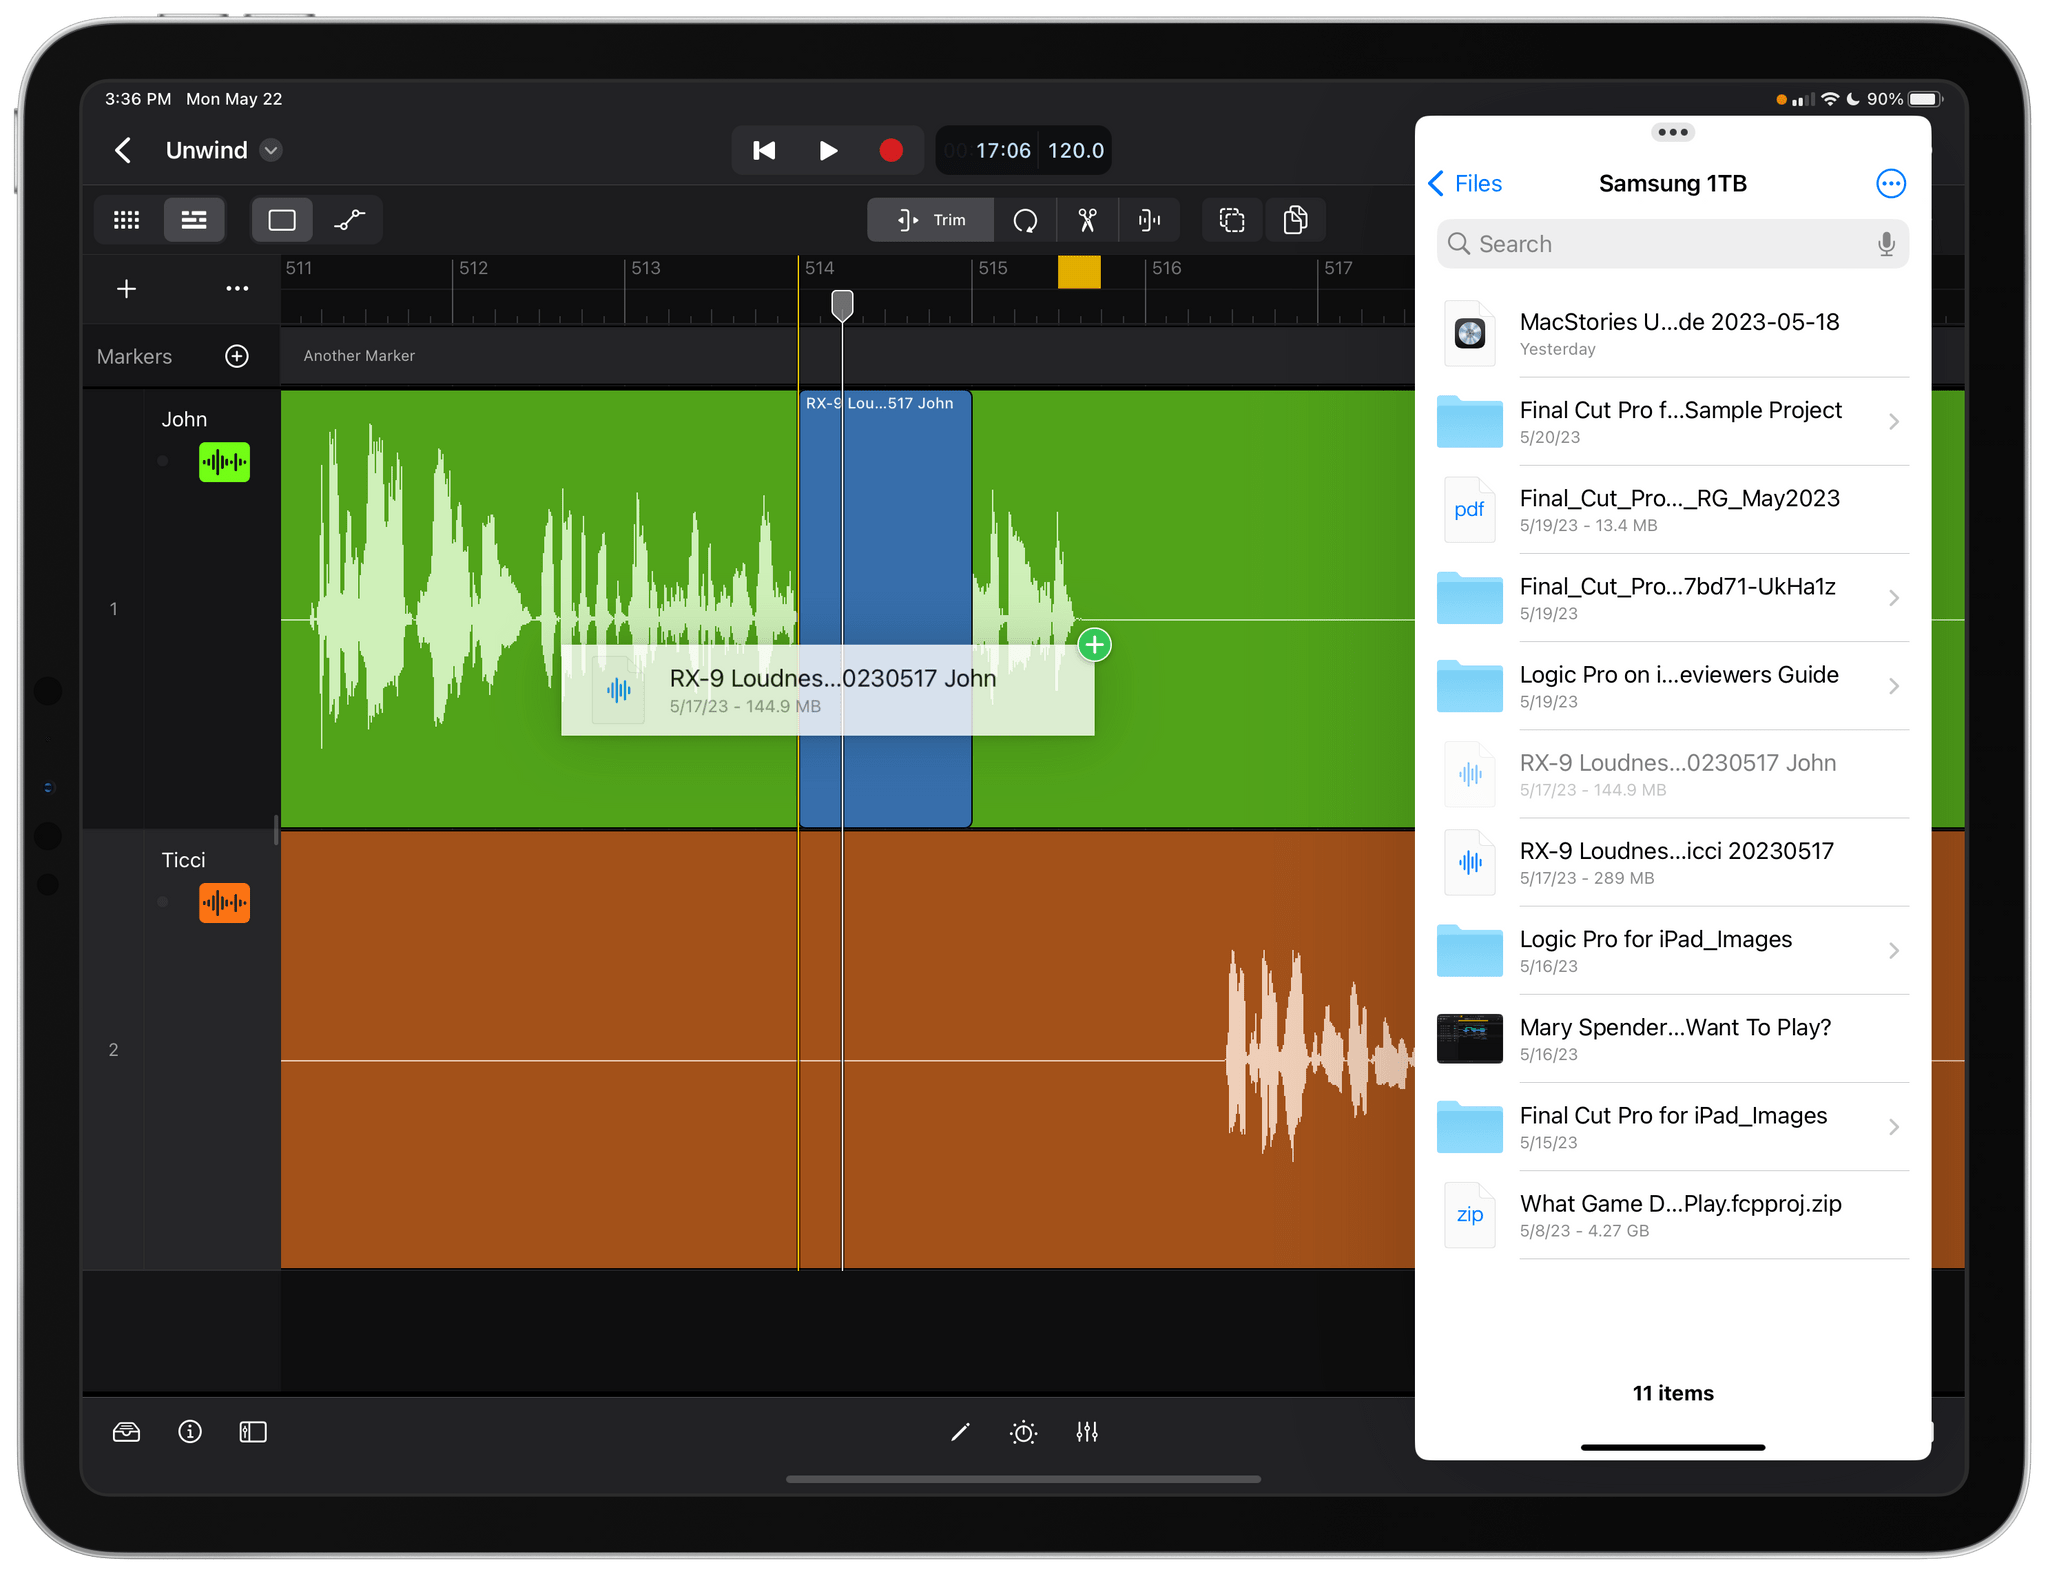 Dragging audio files into Logic Pro for iPad from an external SSD connected to my iPad Pro using Files.